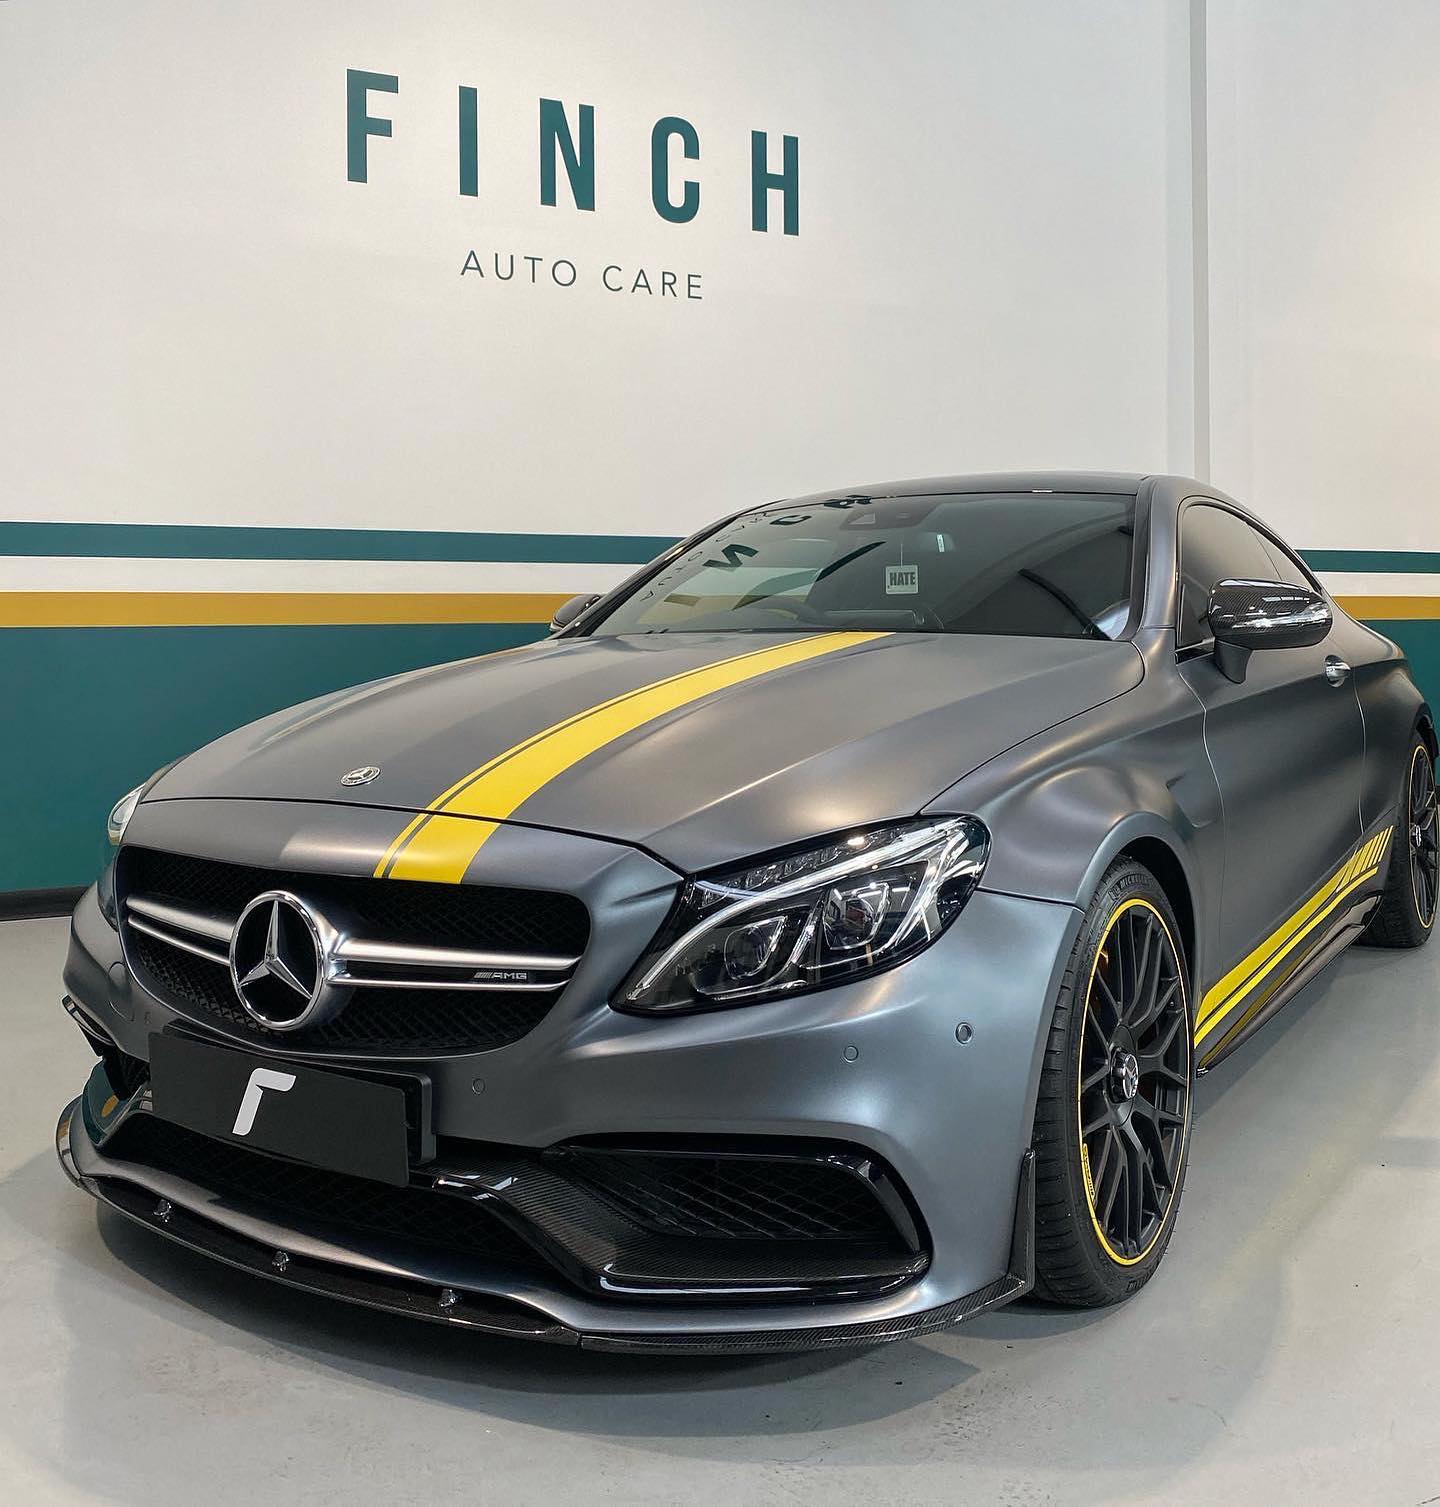 A mercedes-benz coupe with custom yellow accents parked in front of the finch auto care sign.